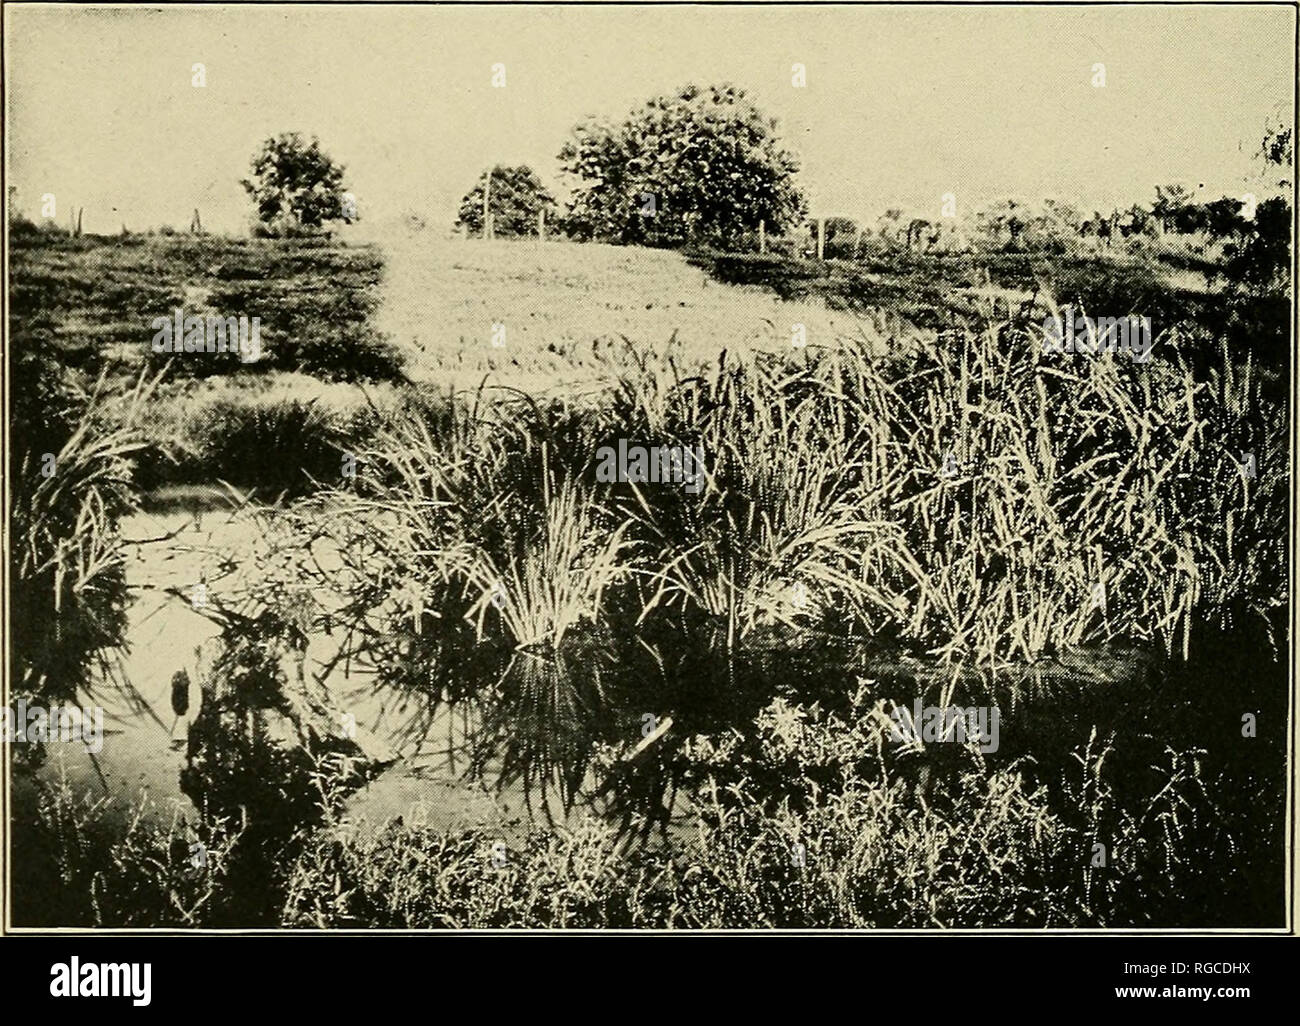 . Bulletin of the U.S. Department of Agriculture. Agriculture; Agriculture. Fig. 1.—View aloii? channel, Bayou Walnut, natural conditions, showing overhanging vege- tation and aquatic vegetation in bed. Surface of water in foreground covered with duckweed (Lemna spp.) and with aquatic plant, Jussiaeu diffusa, in background.. Fig. 2.—View across Bayou Walnut, natural conditions, showing absence of overhanging vegetation, with aquatic grass, Zizaniopsis miliacea, in bed. IMPOUNDING WATER TO CONTROL MALARIA MOSQUITOES.. Please note that these images are extracted from scanned page images that may Stock Photo